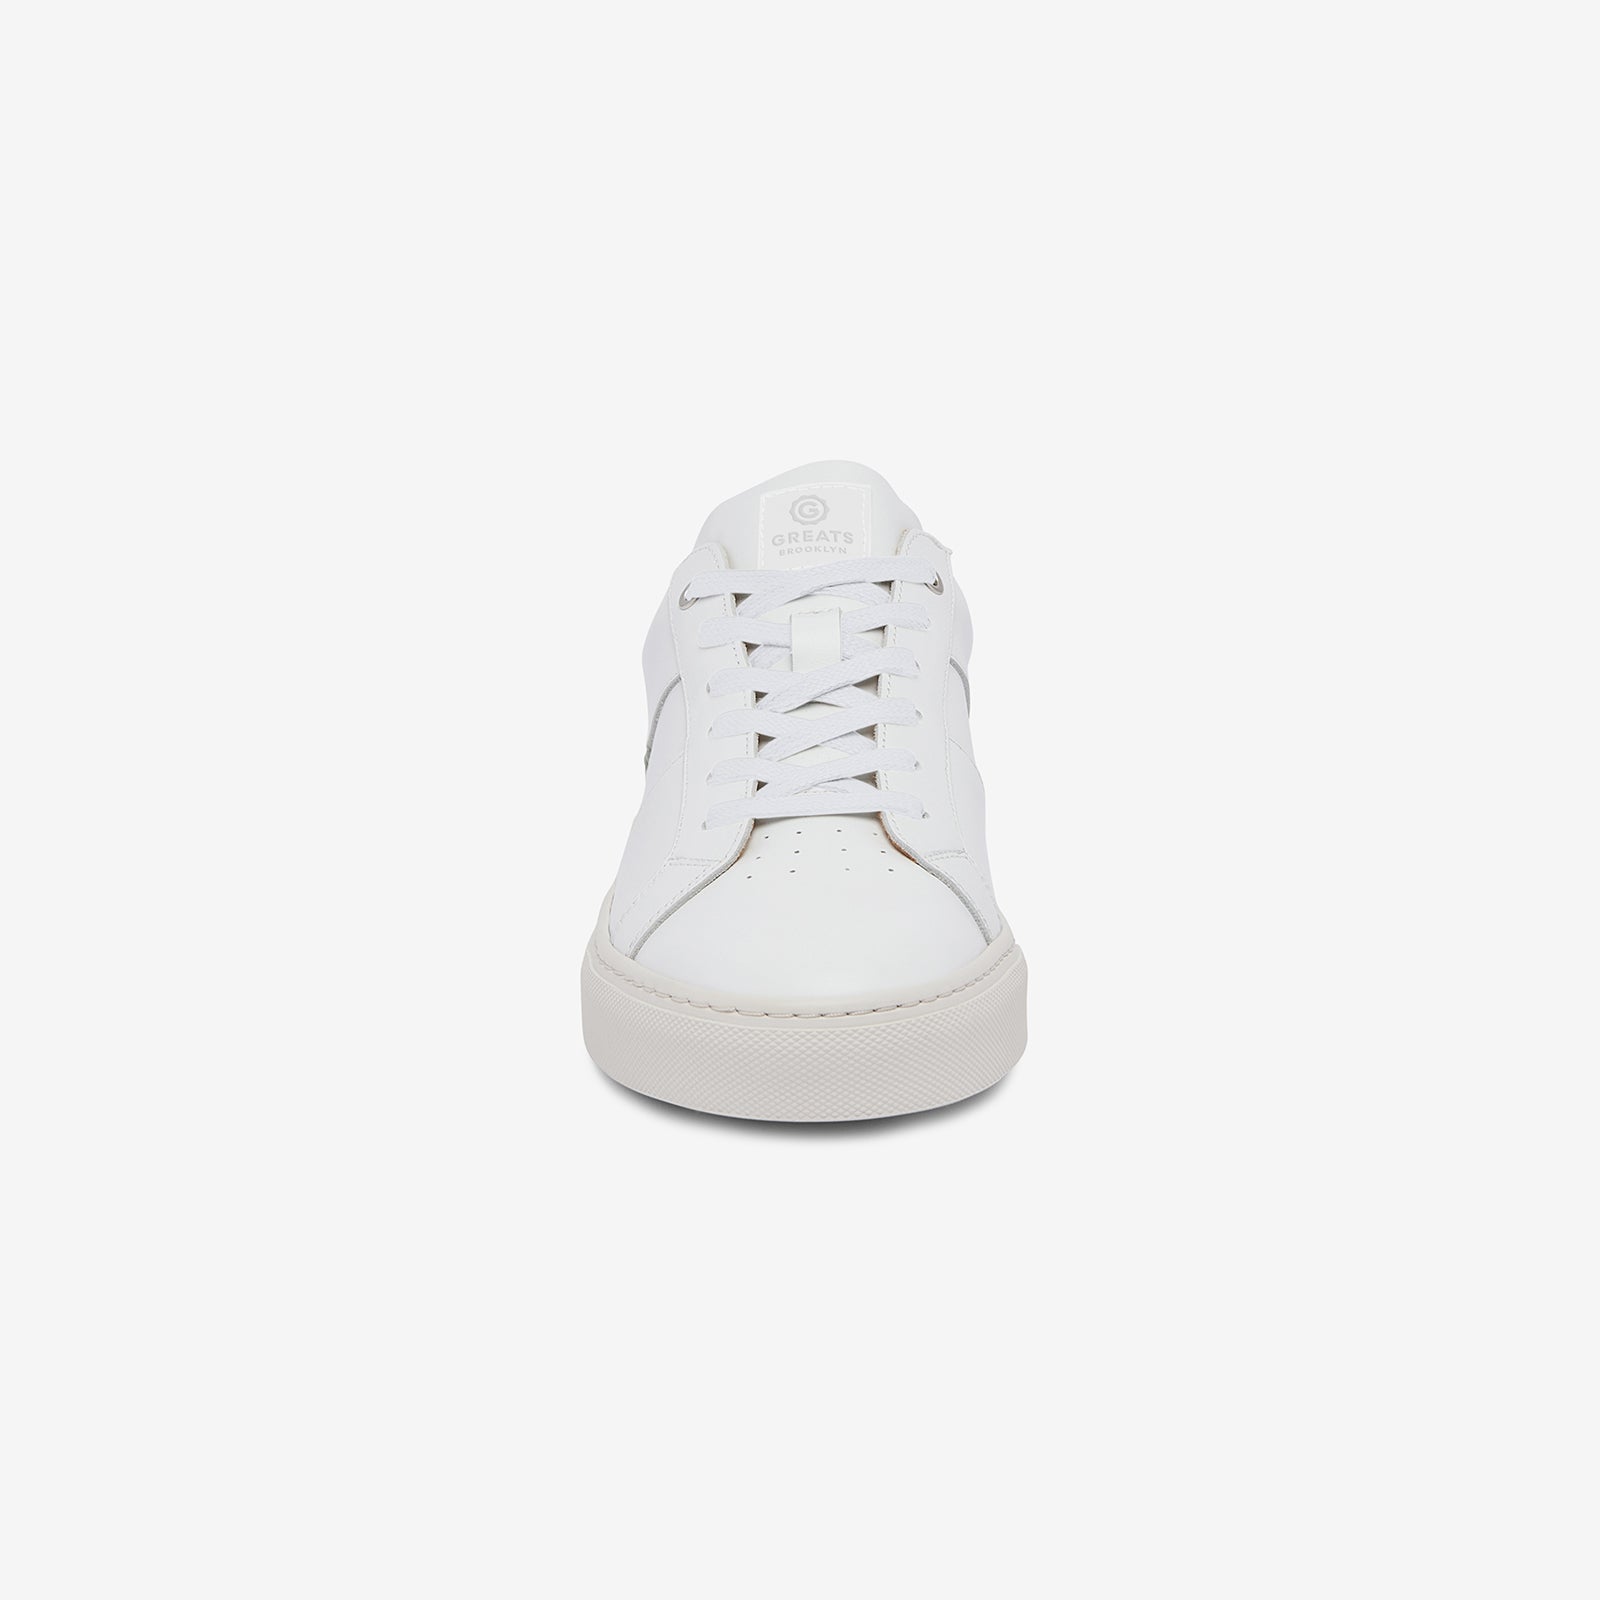 GREATS Premium Waxed Laces - Blanco